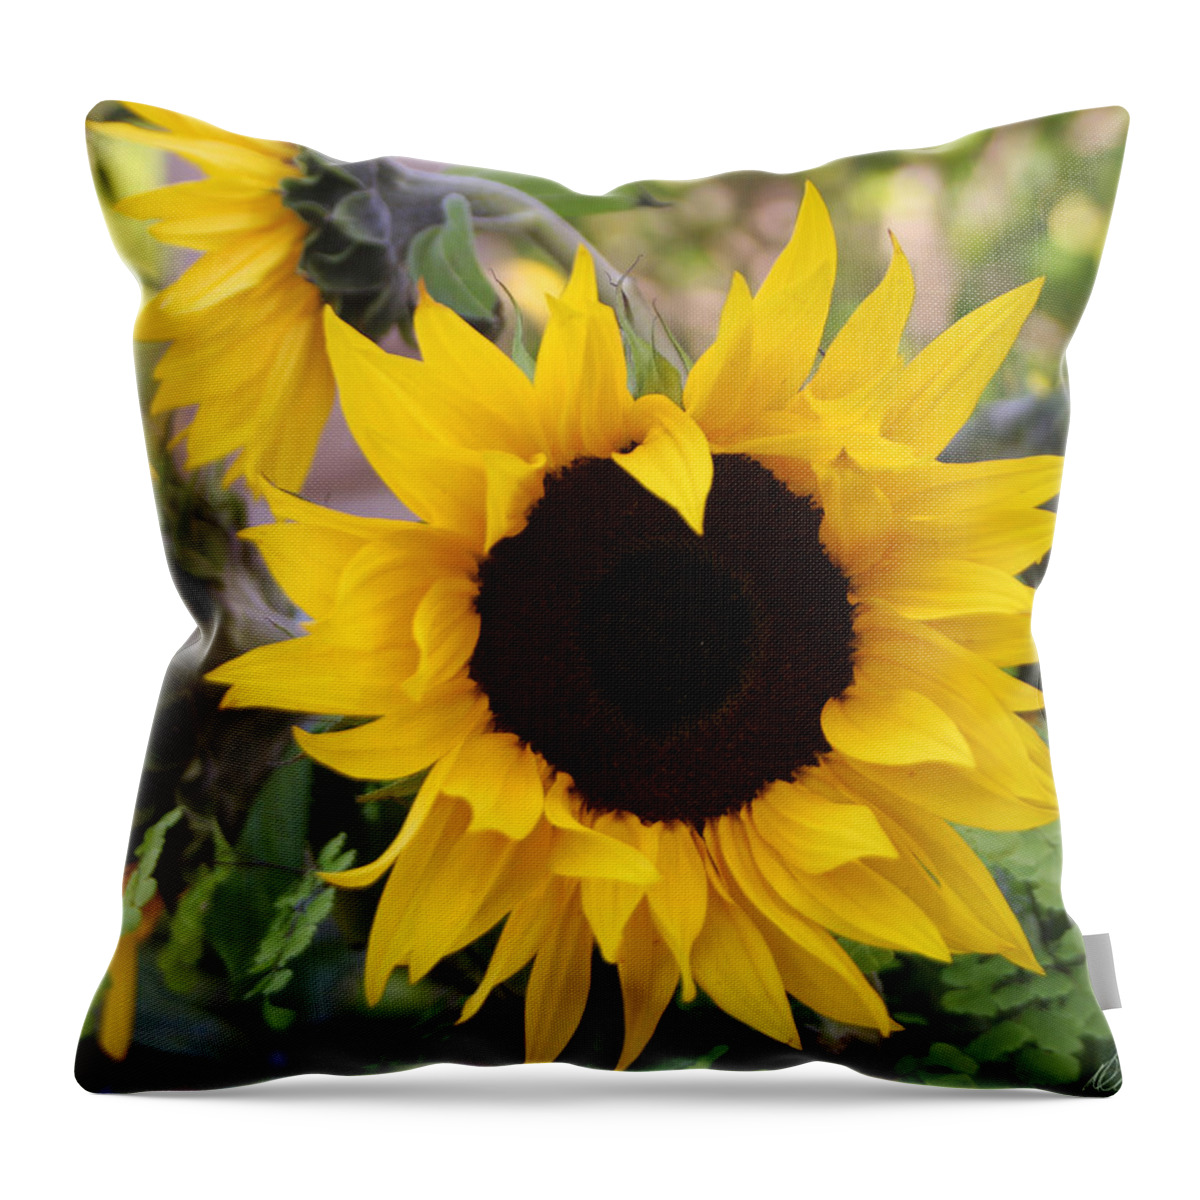 Sunflowers Throw Pillow featuring the photograph Sunflowers #1 by Diana Haronis